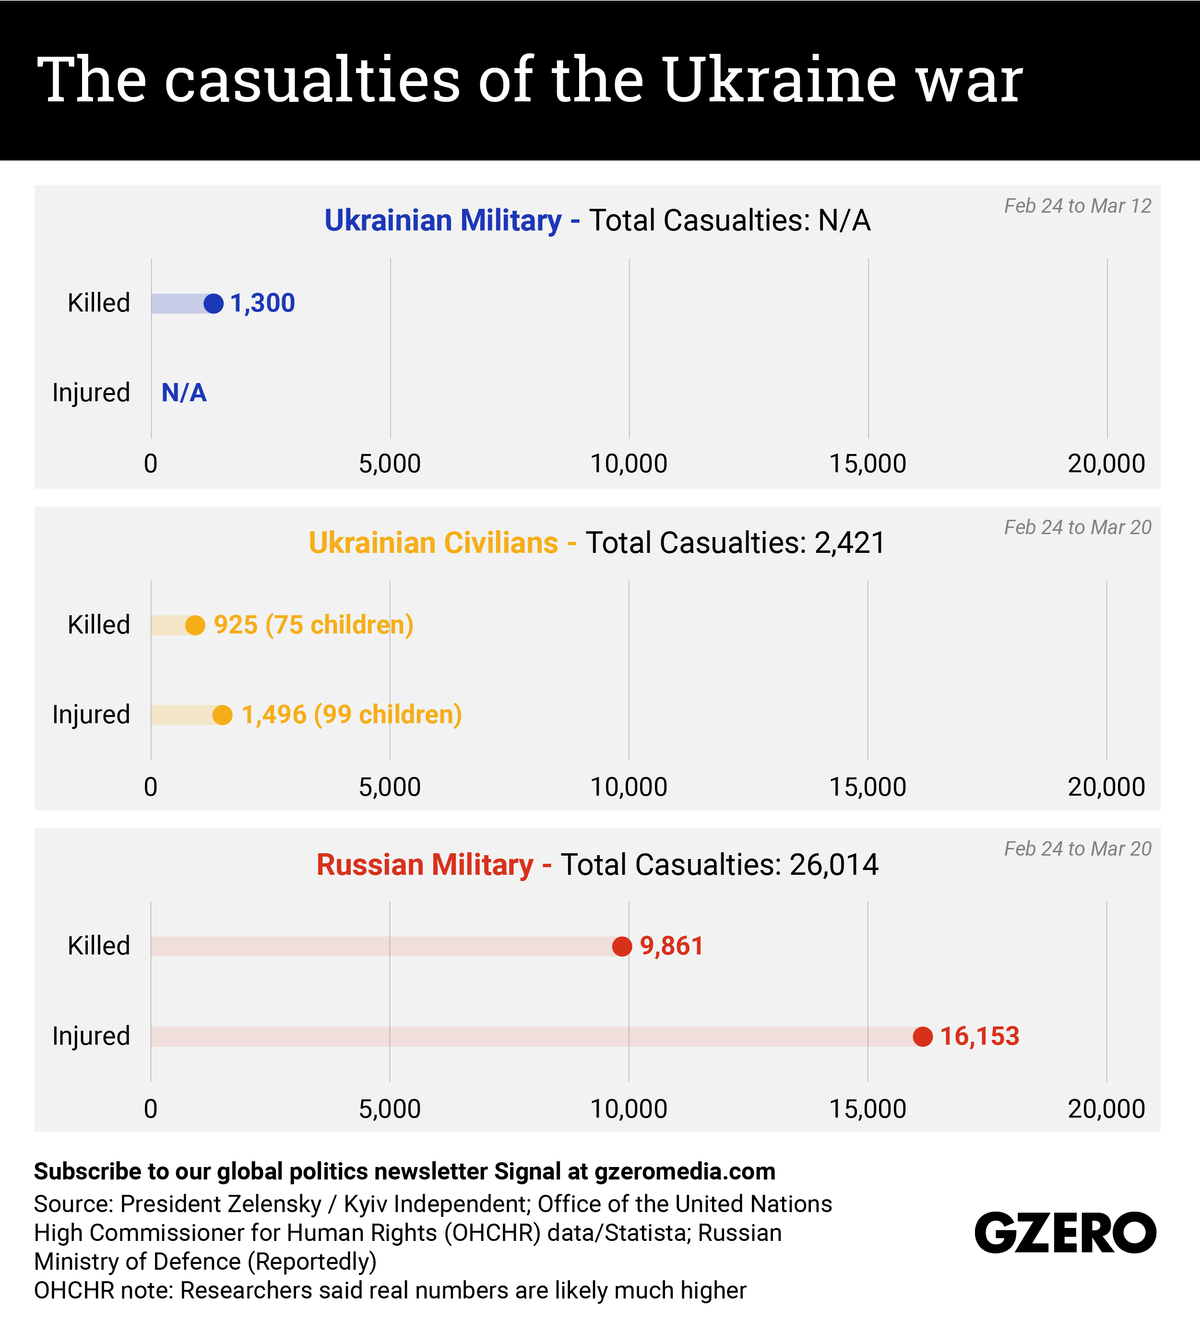 The Graphic Truth: The casualties of the Ukraine war